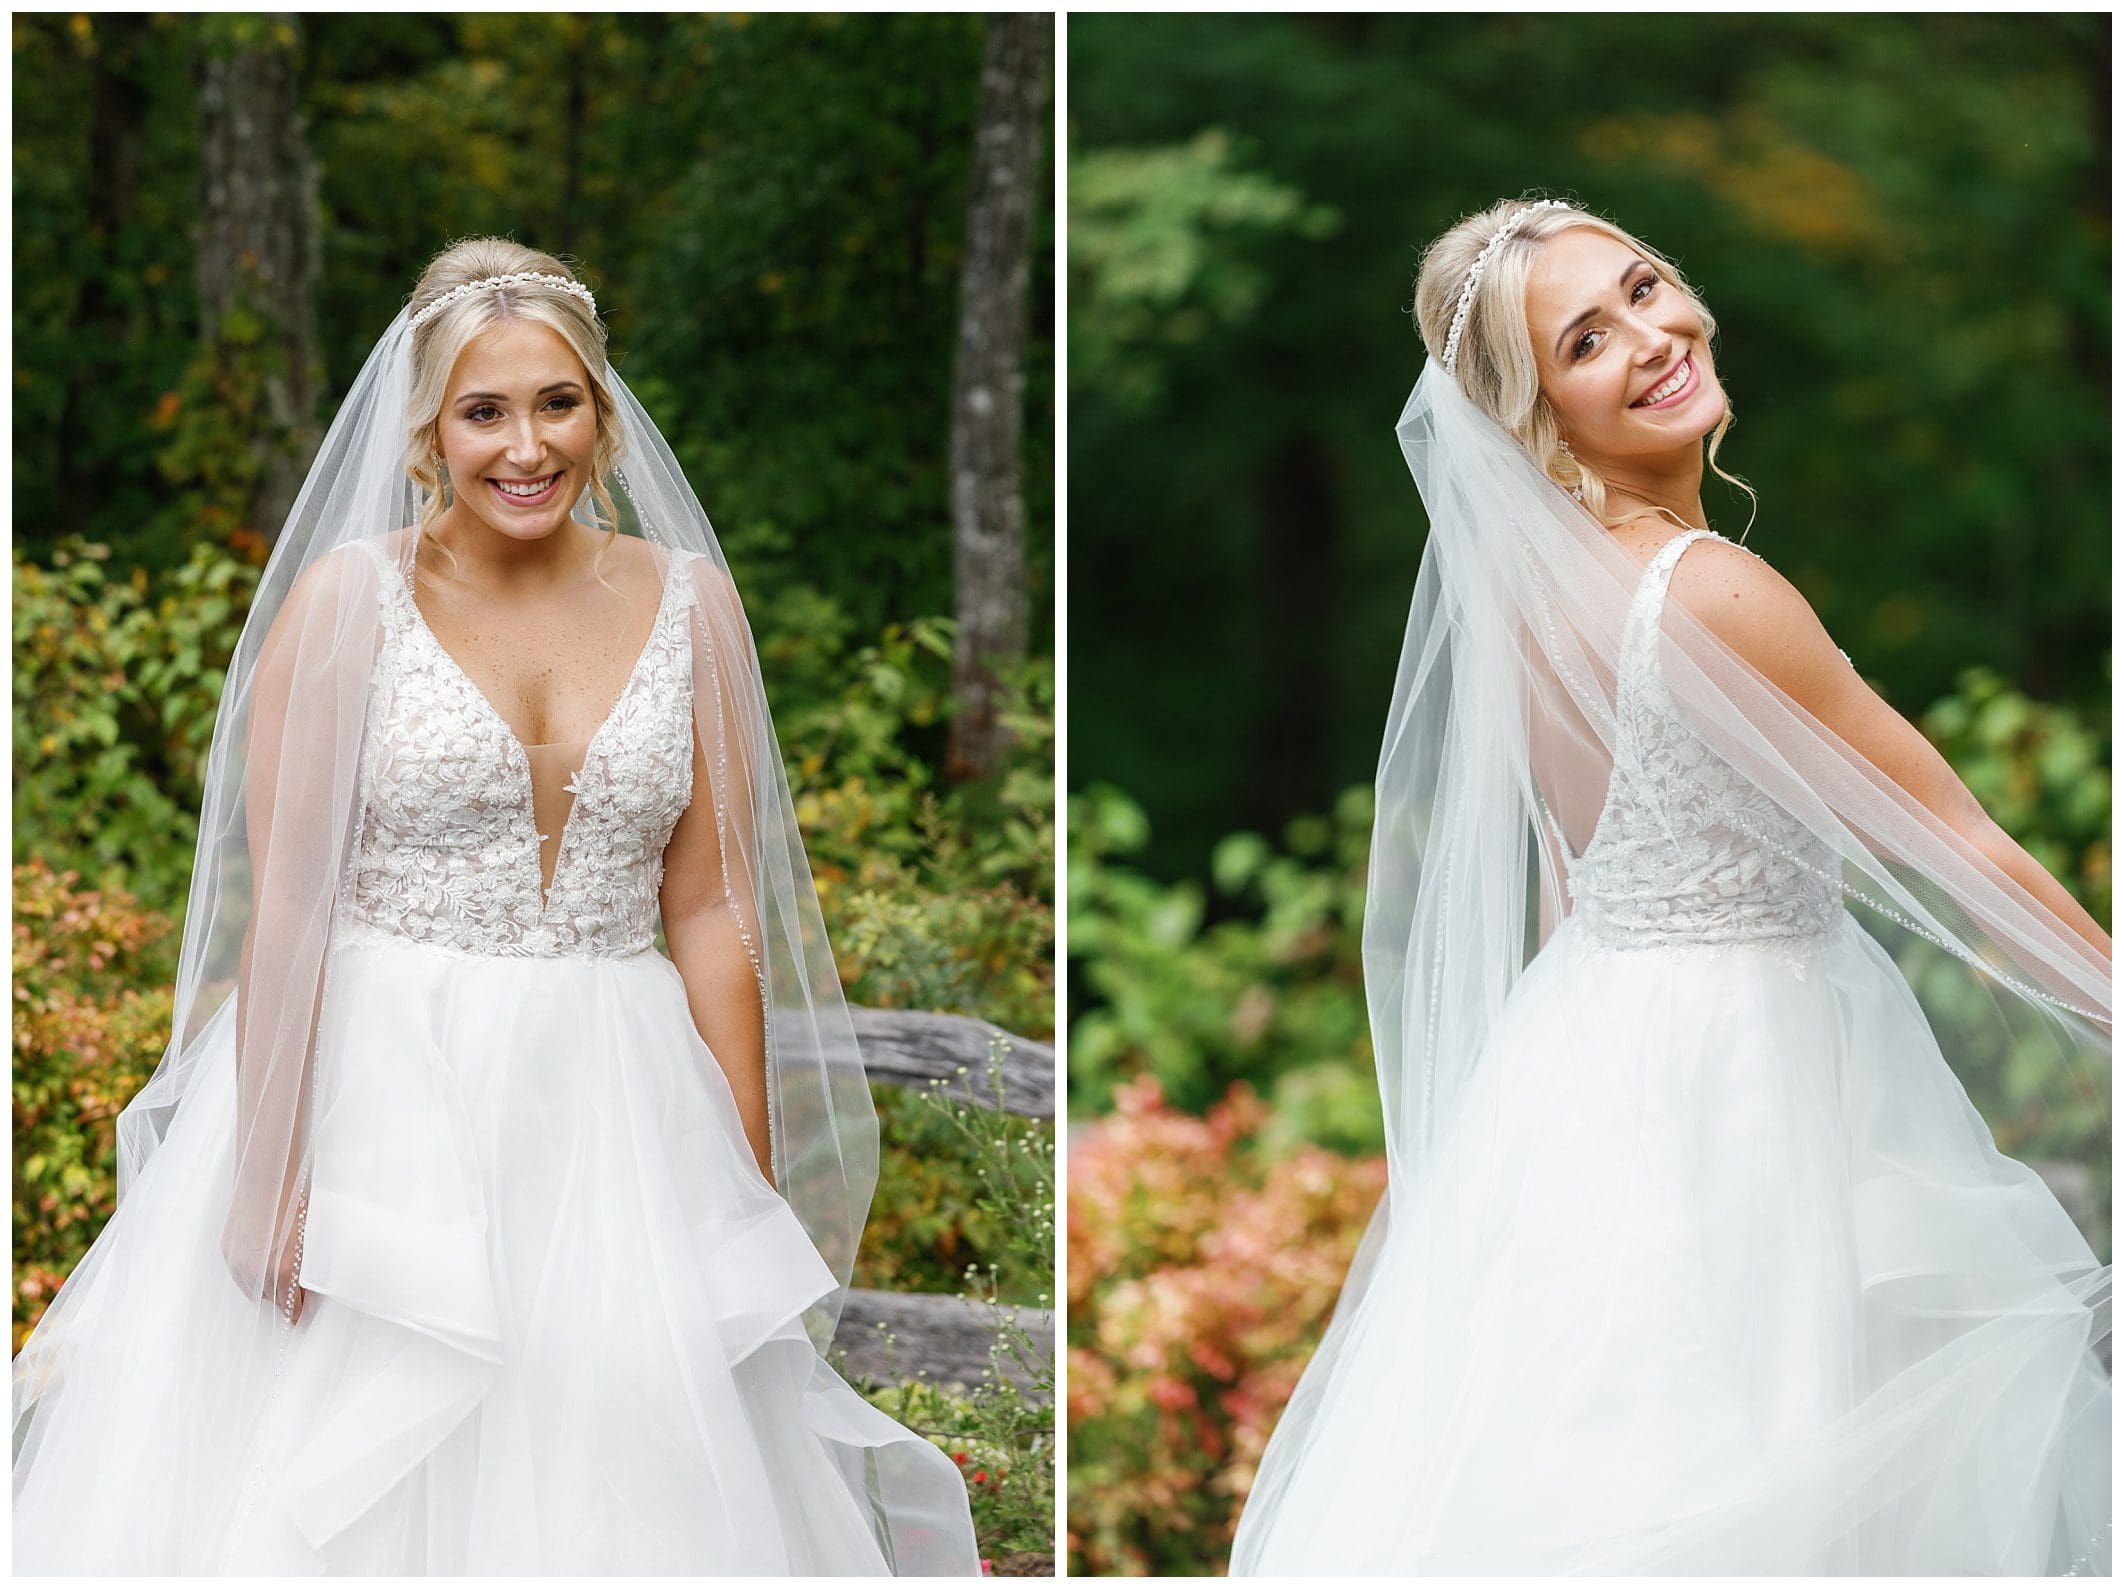 A bride smiles in front of a tree in a wooded area.